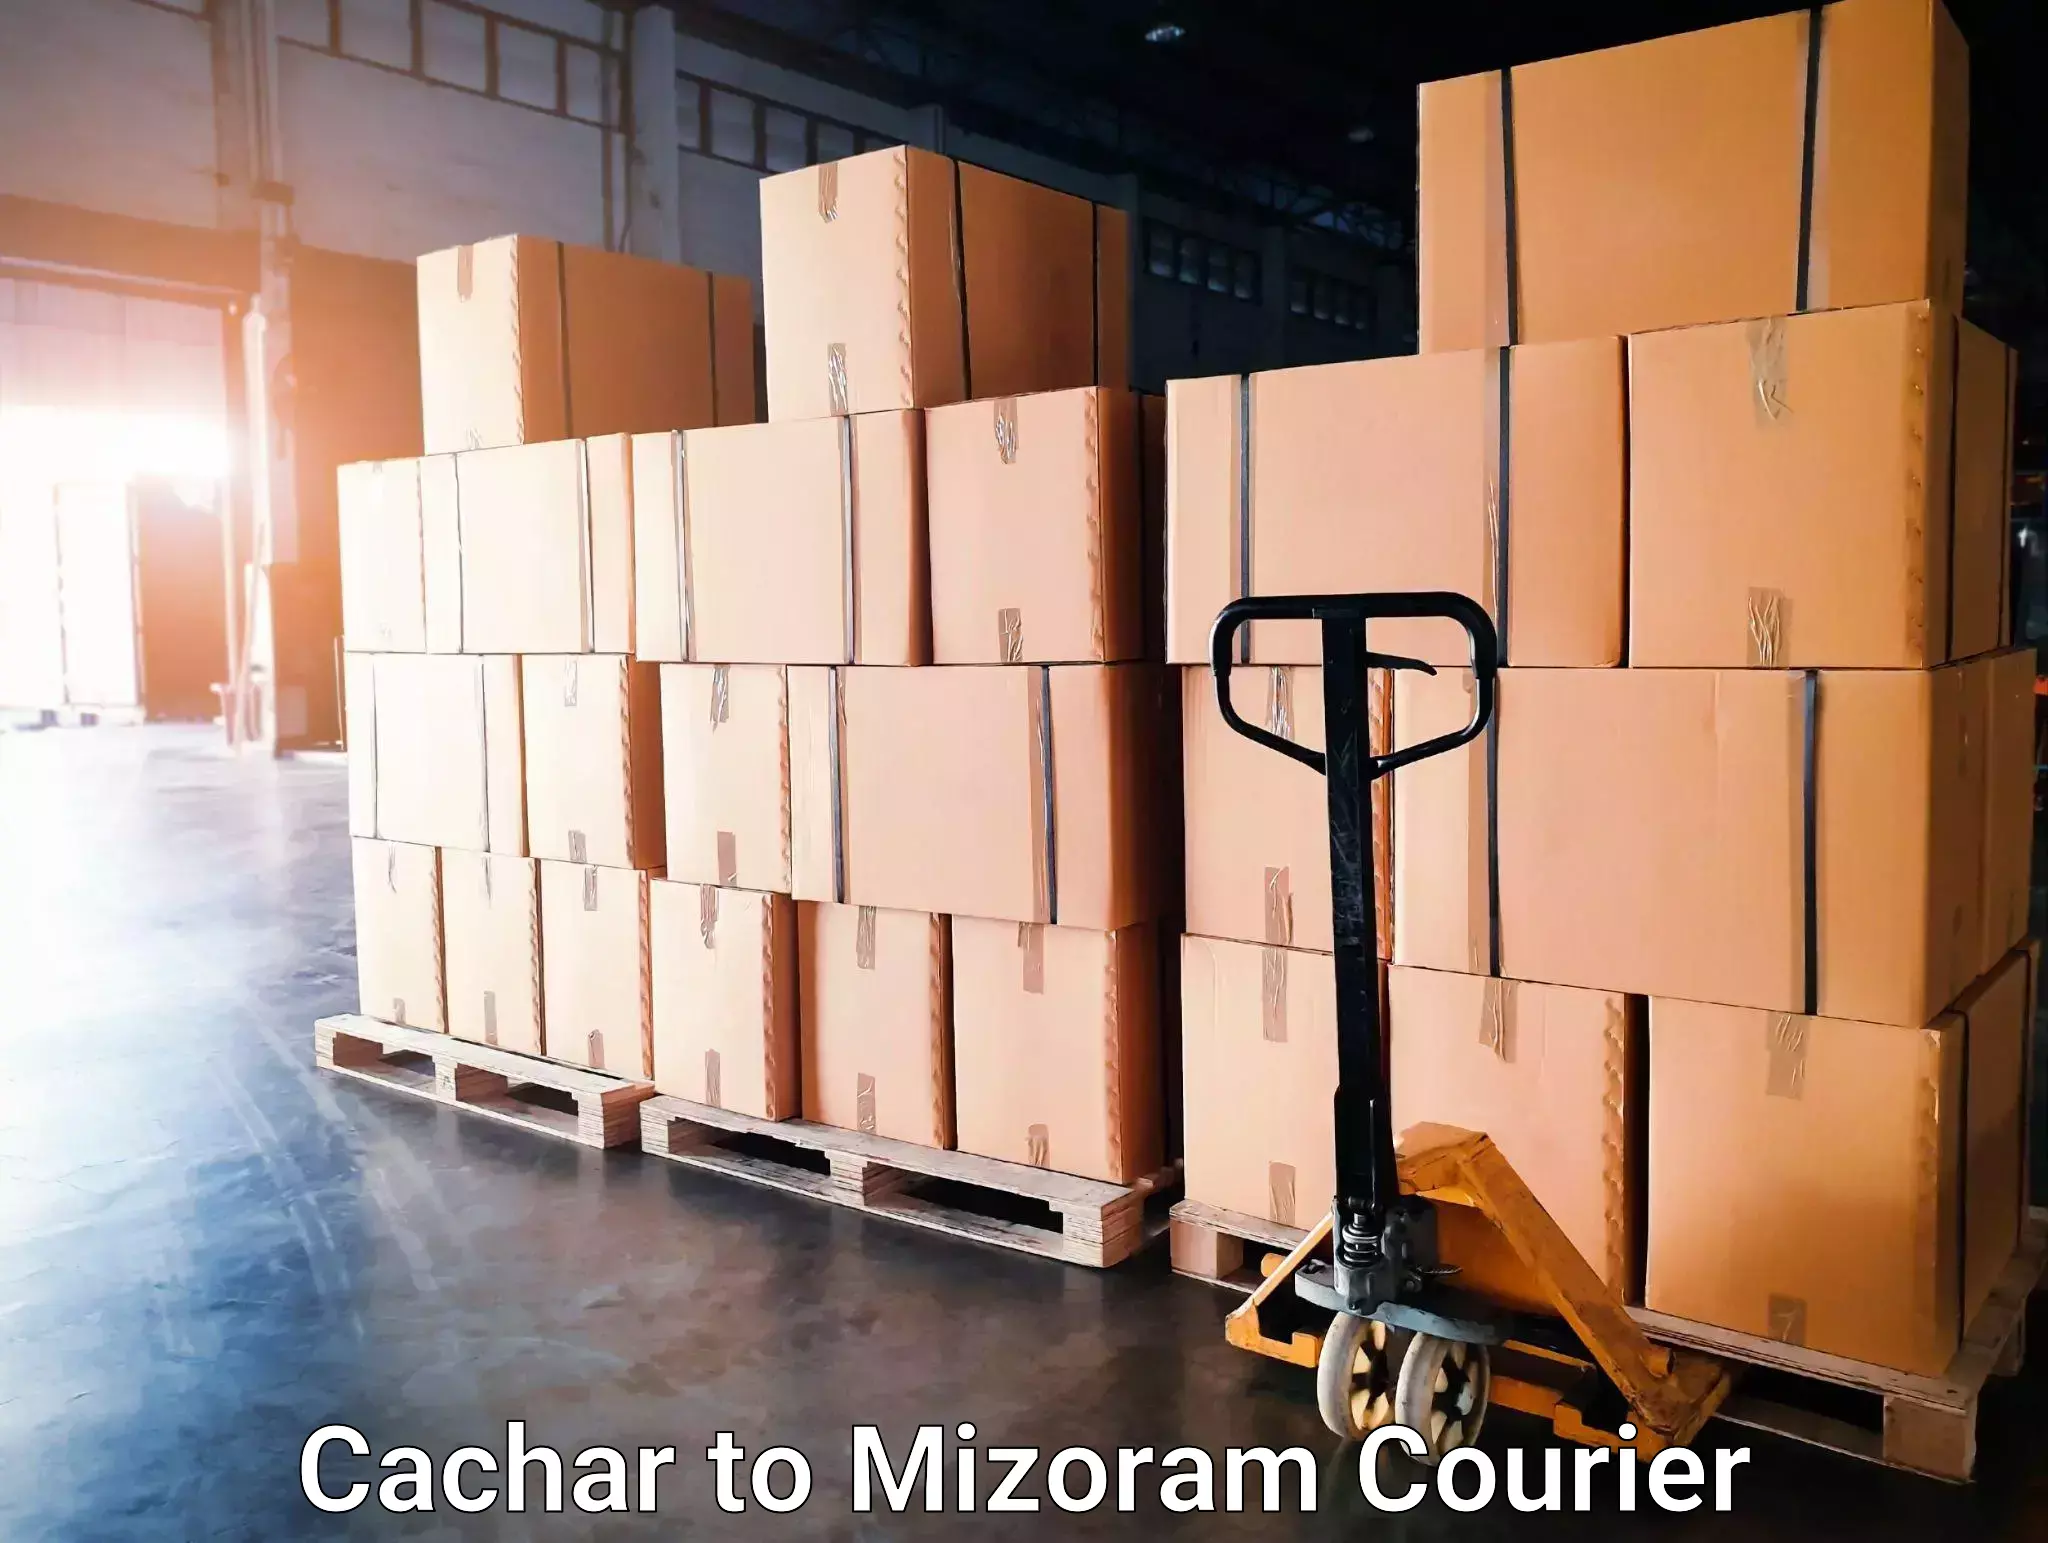 24/7 courier service Cachar to Tlabung